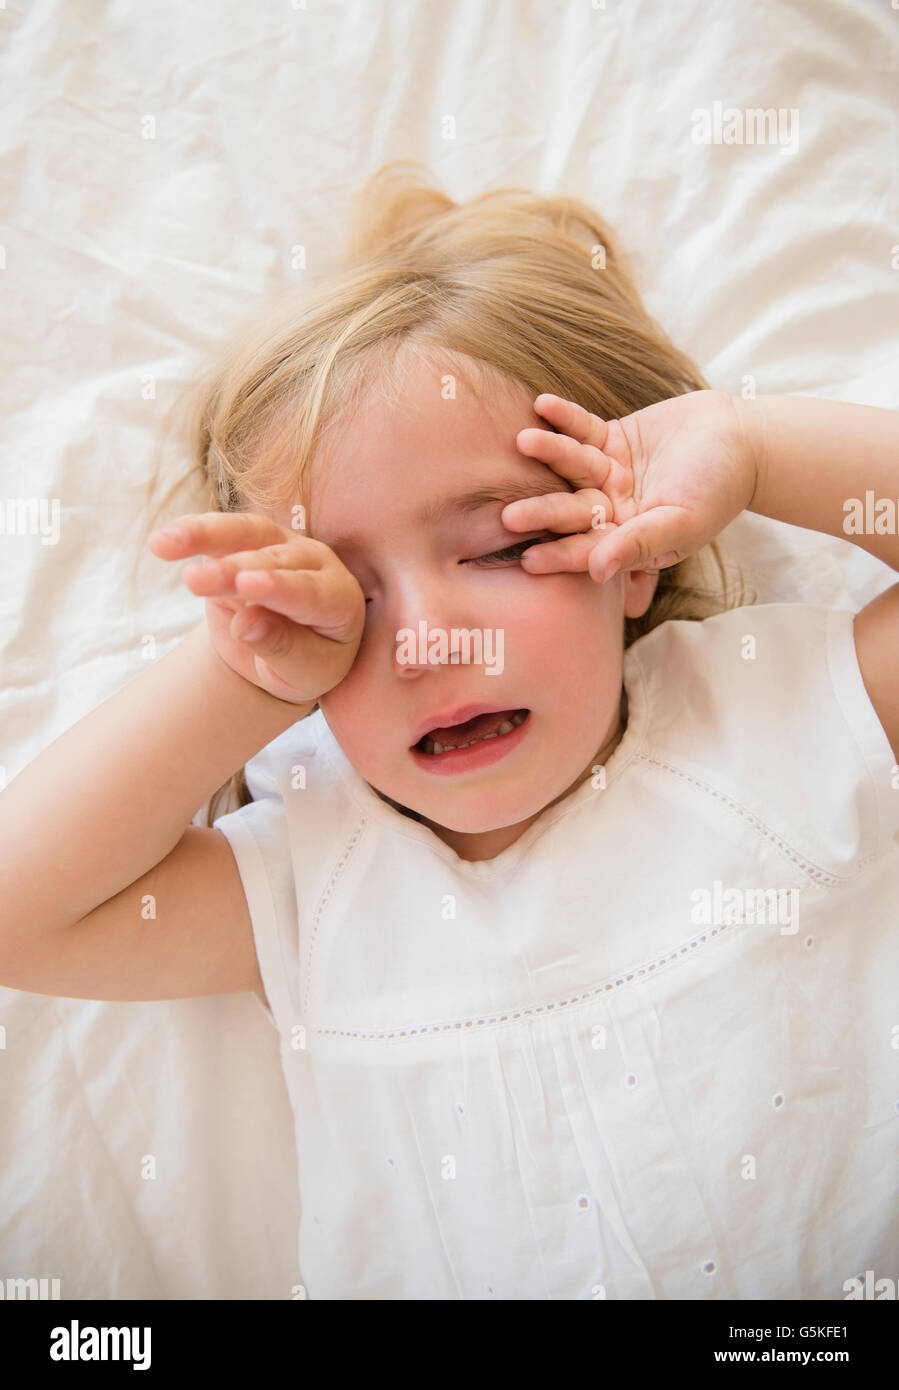 Caucasian girl crying on bed Stock Photo